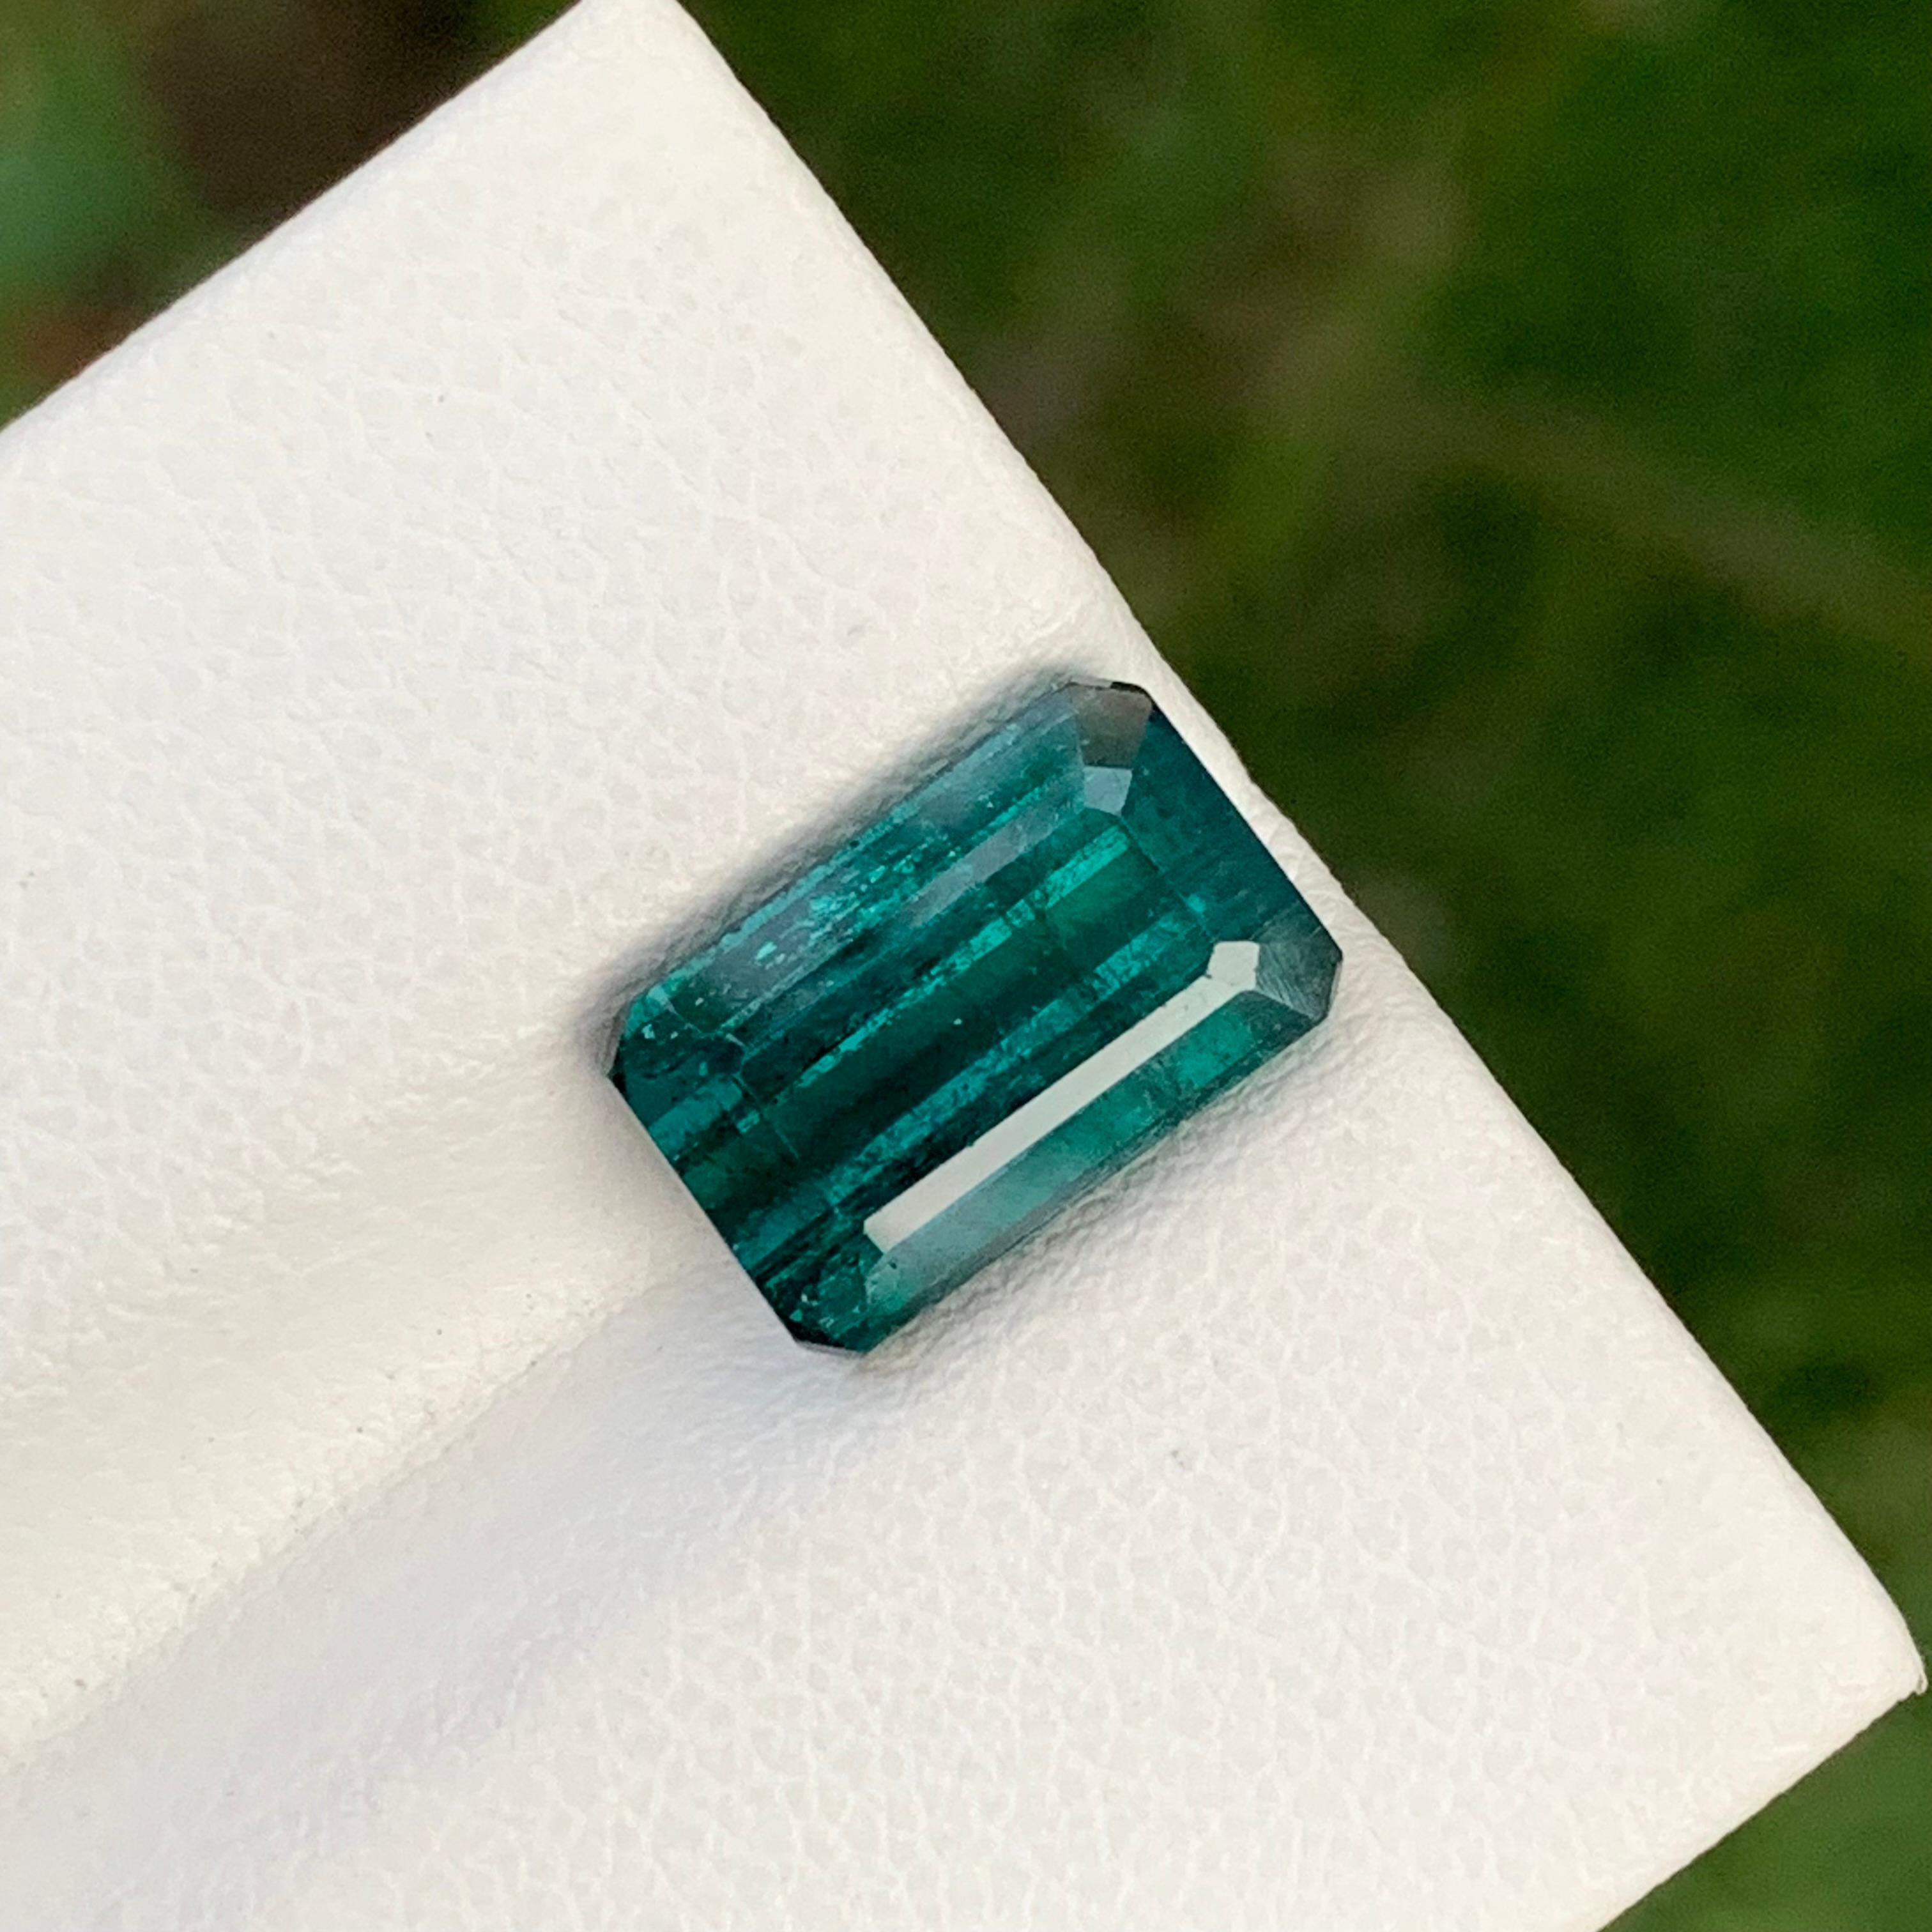 Emerald Cut 3.80 Carat Natural Loose Indicolite Tourmaline Included Gemstone From Earth Mine For Sale